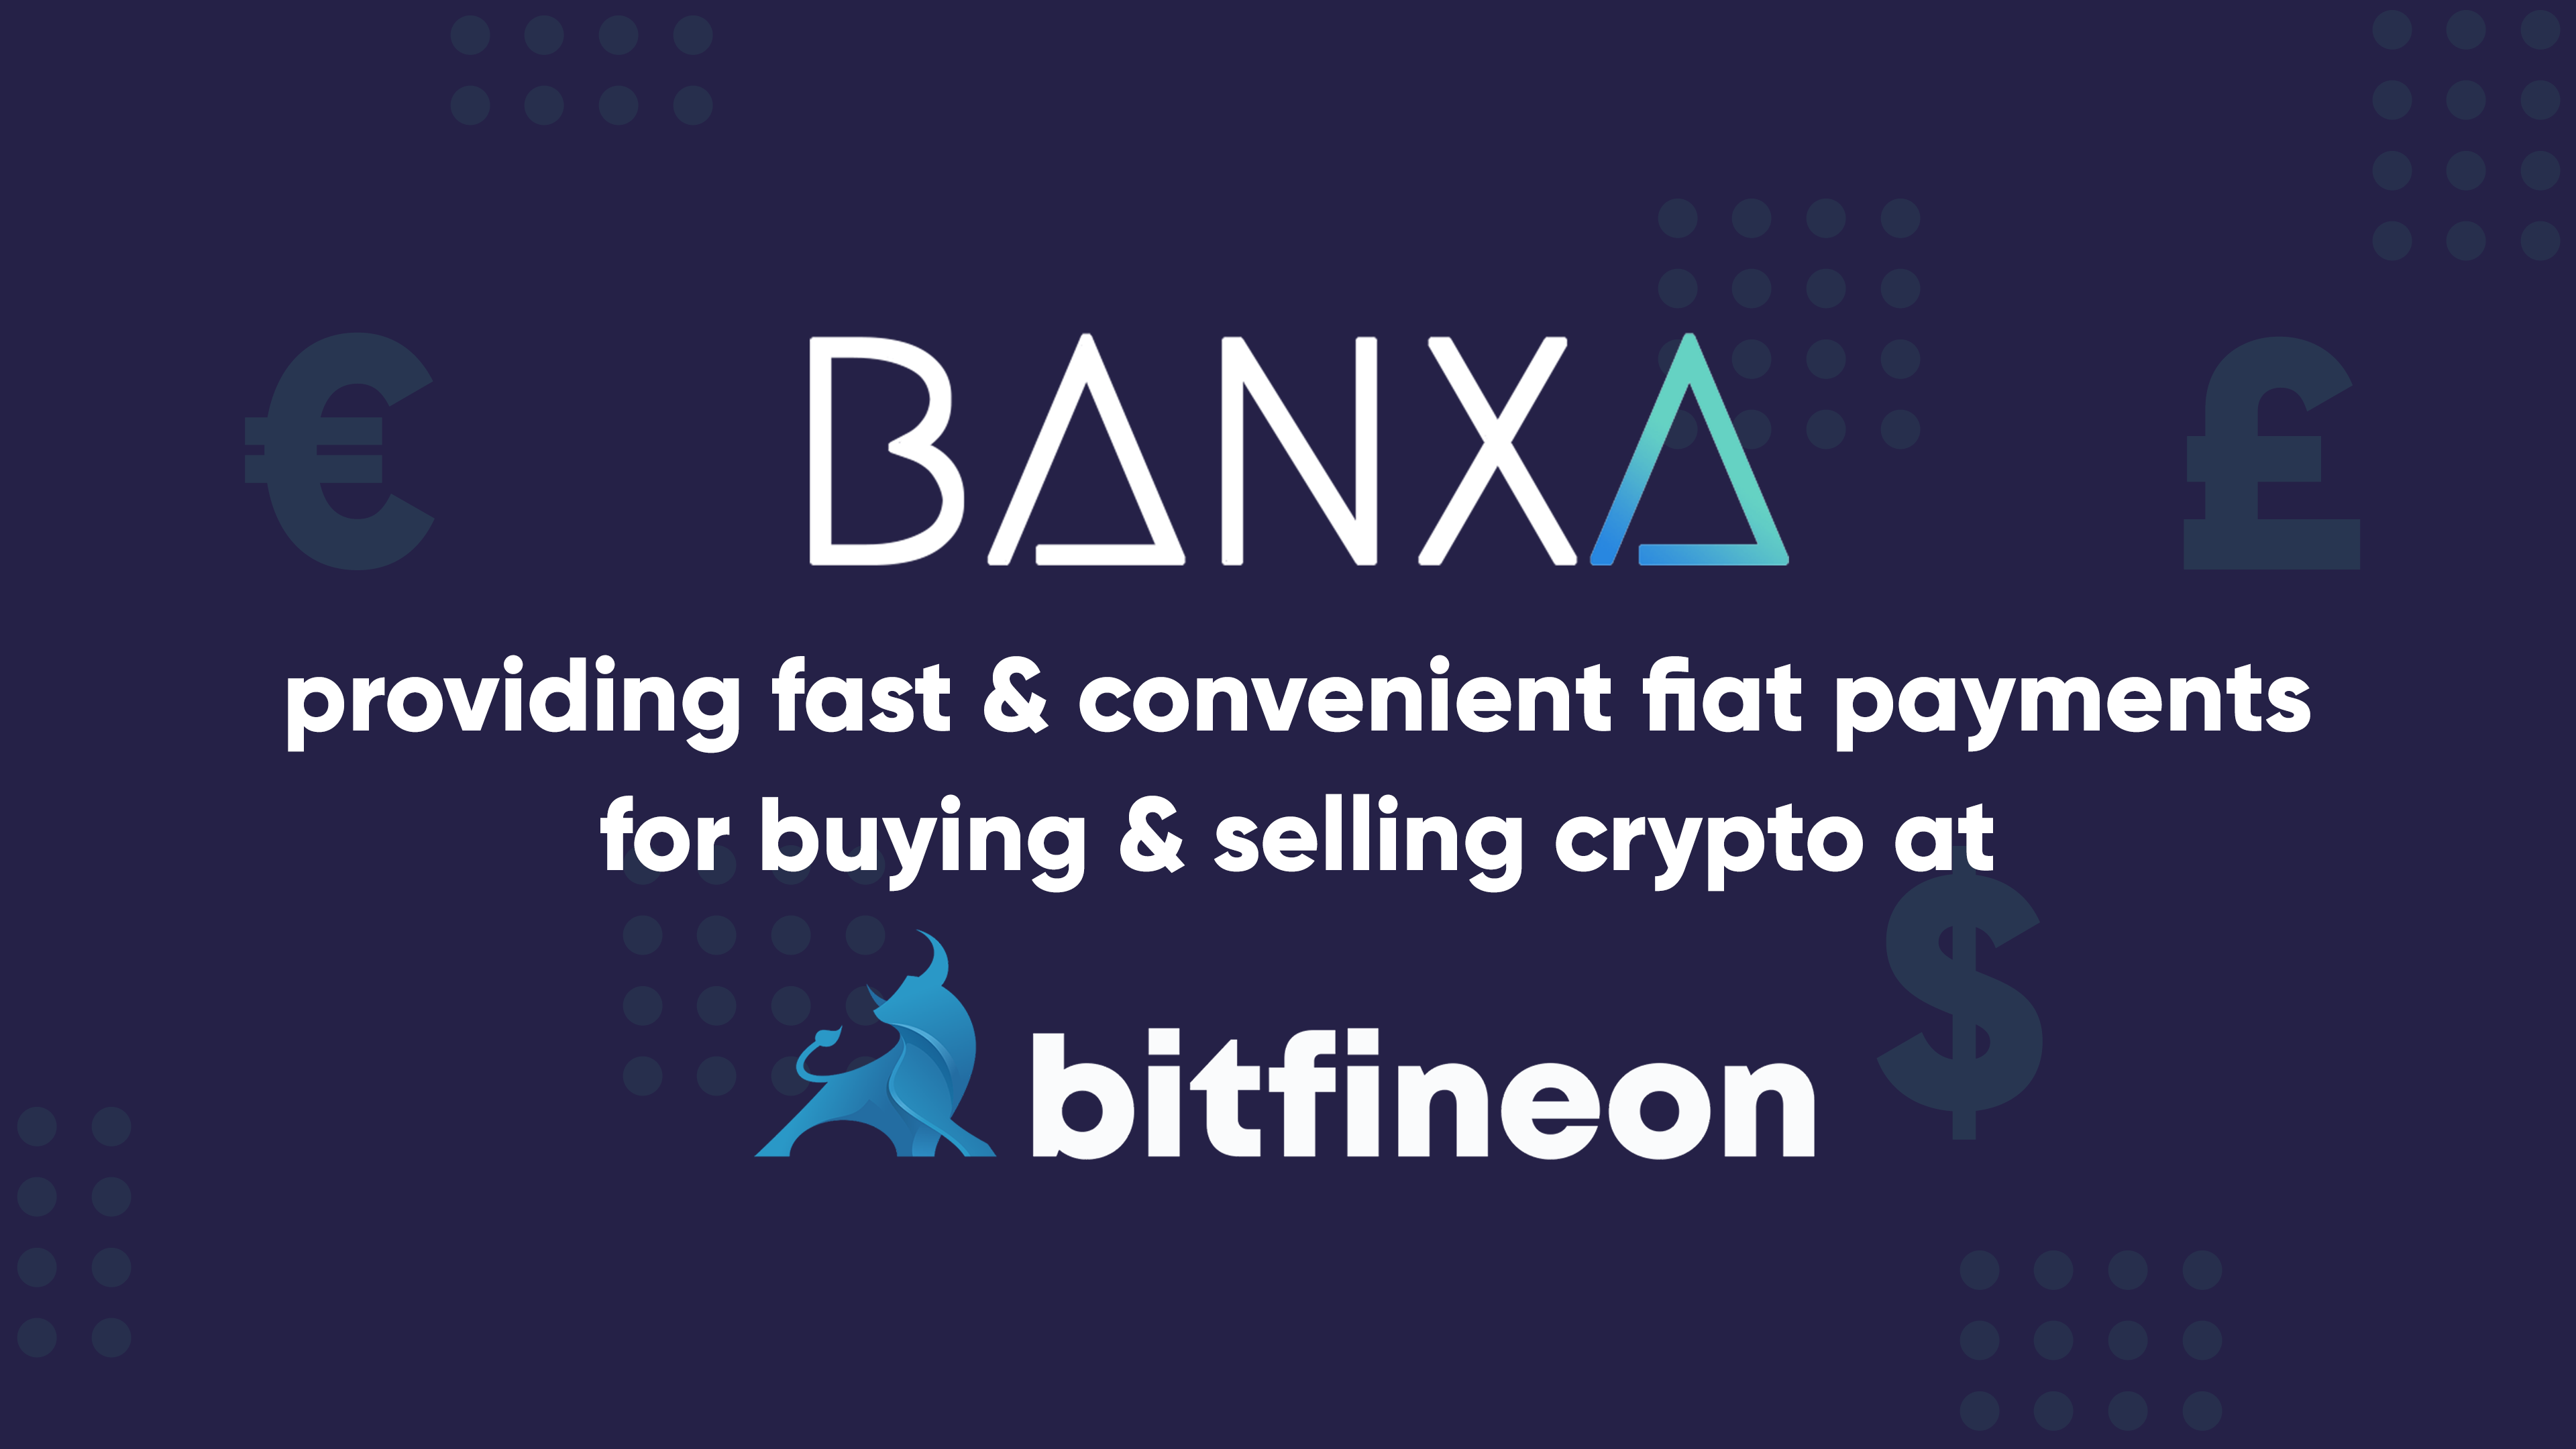 Bitfineon joins with Banxa to offer fiat payments | by Bitfineon |  bitfineon | Medium